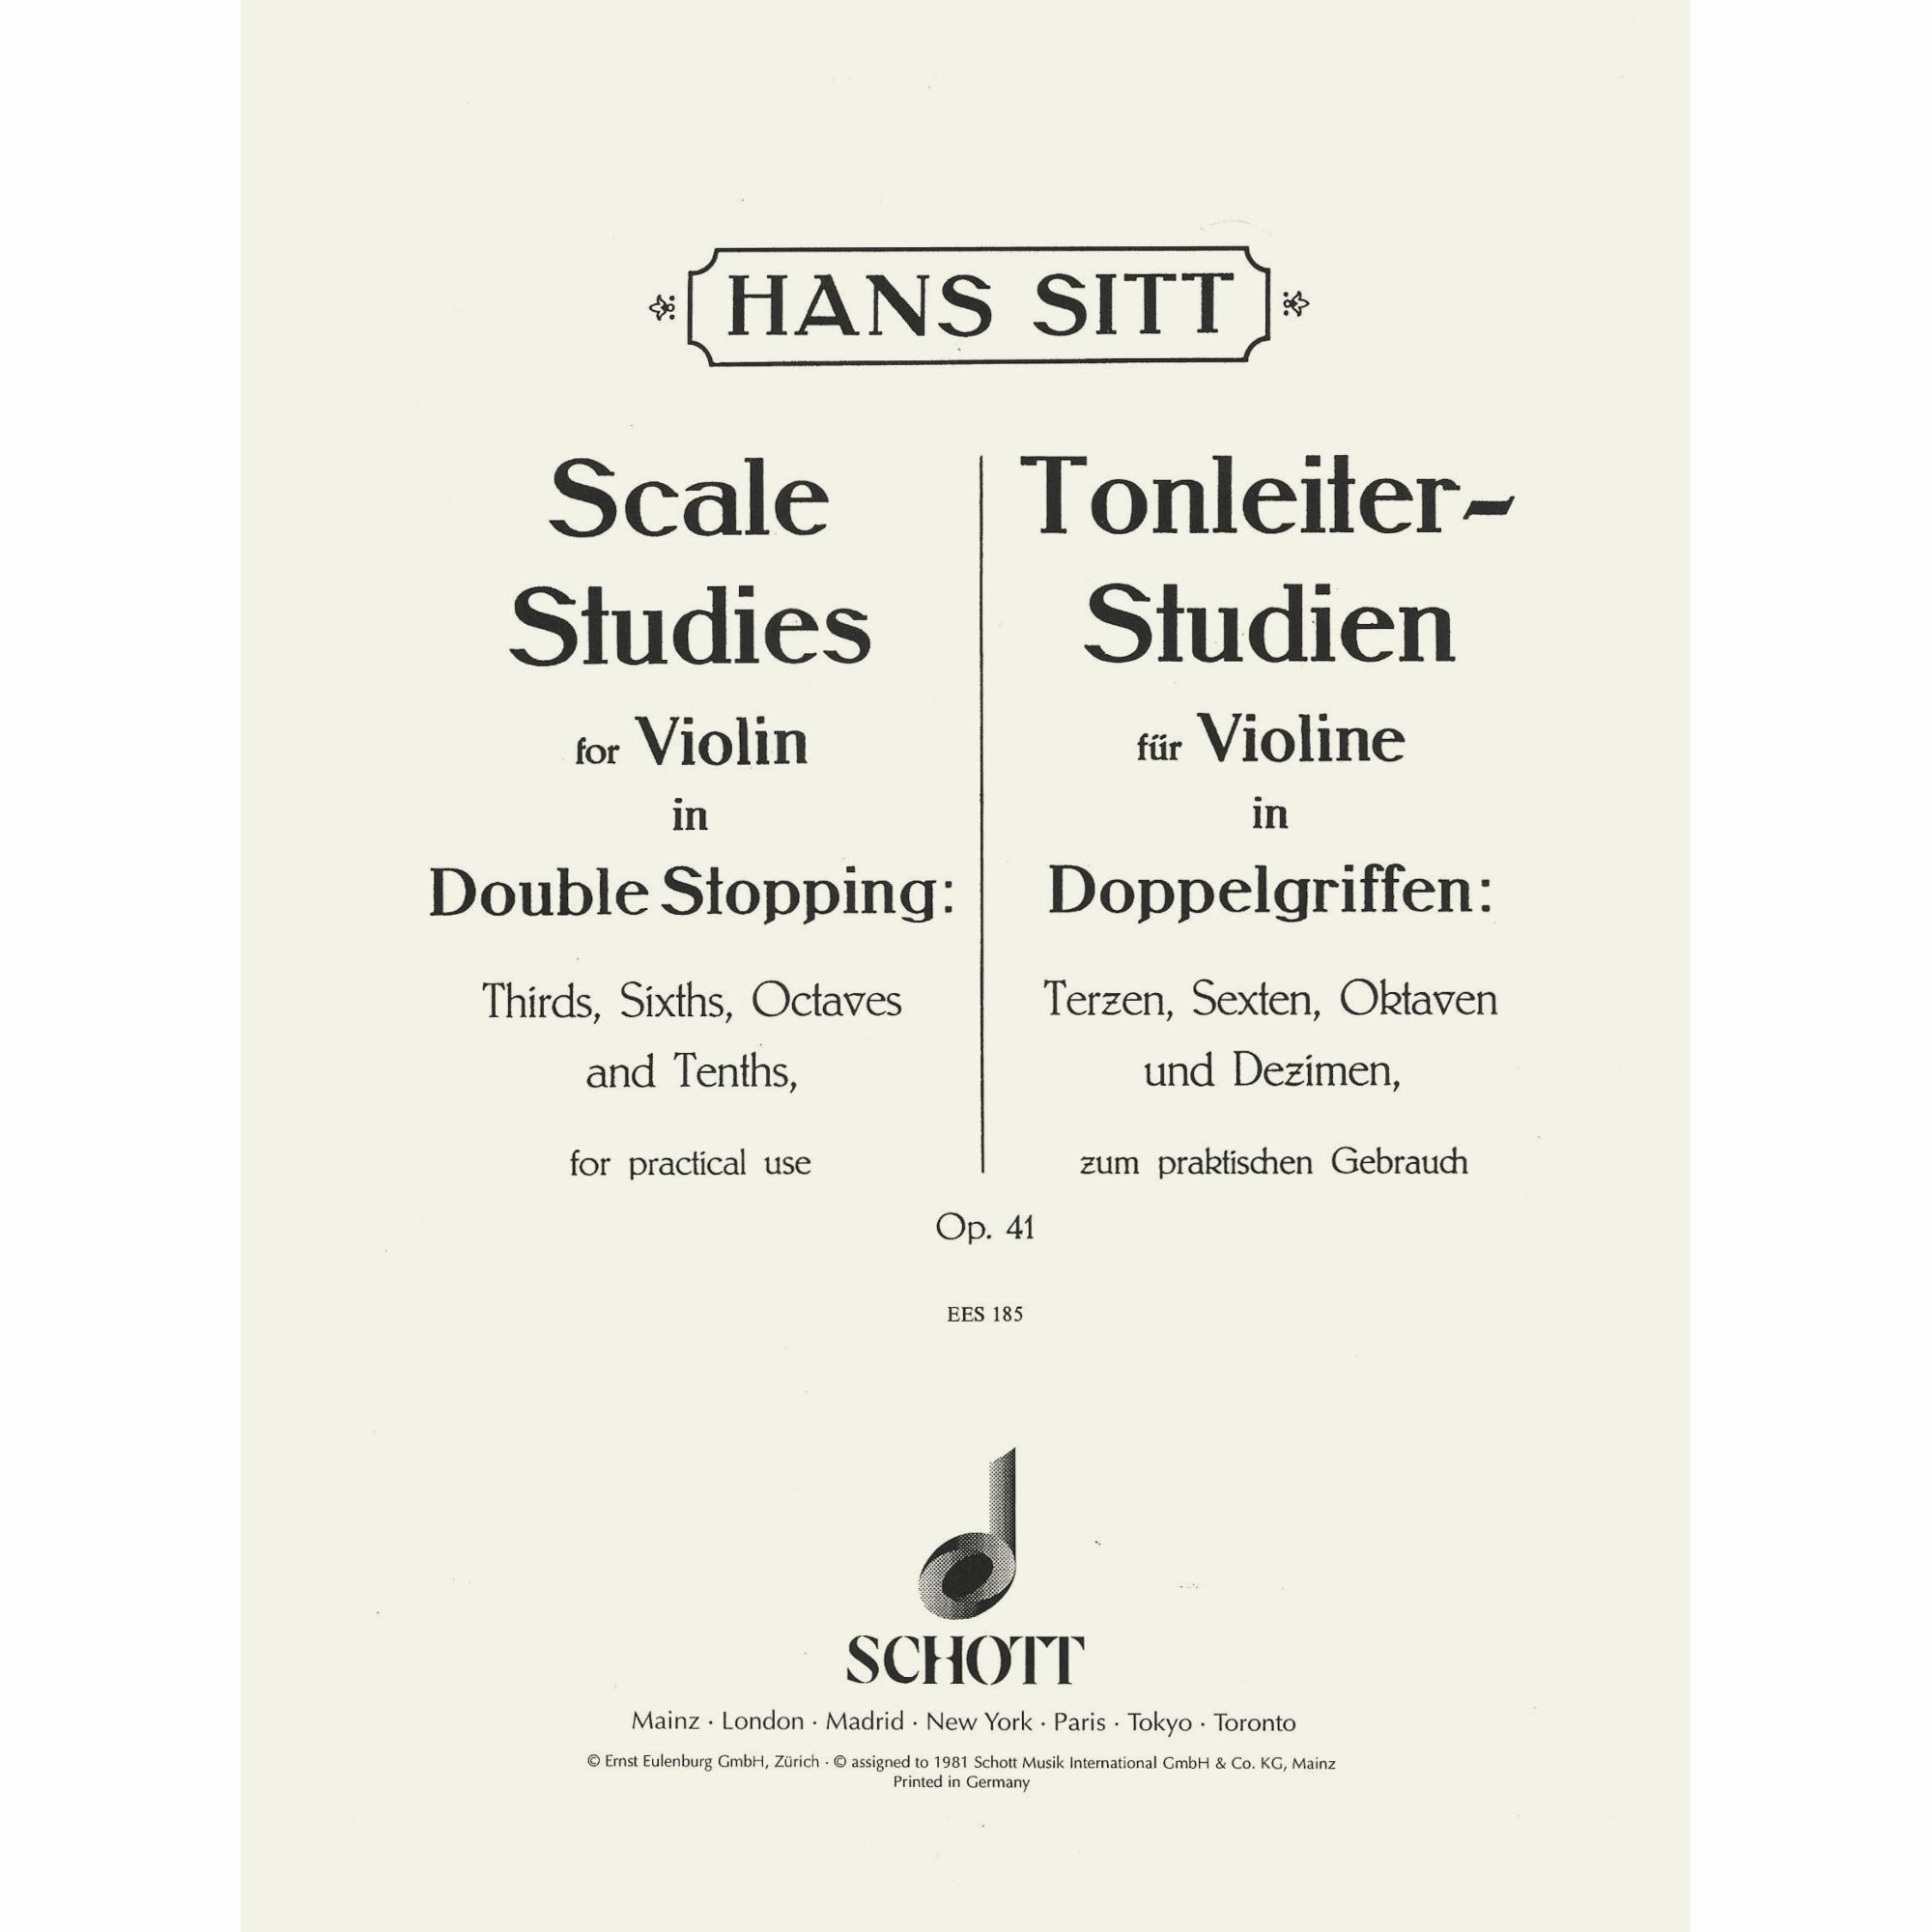 Sitt -- Scale Studies in Double Stopping, Op. 41 for Violin